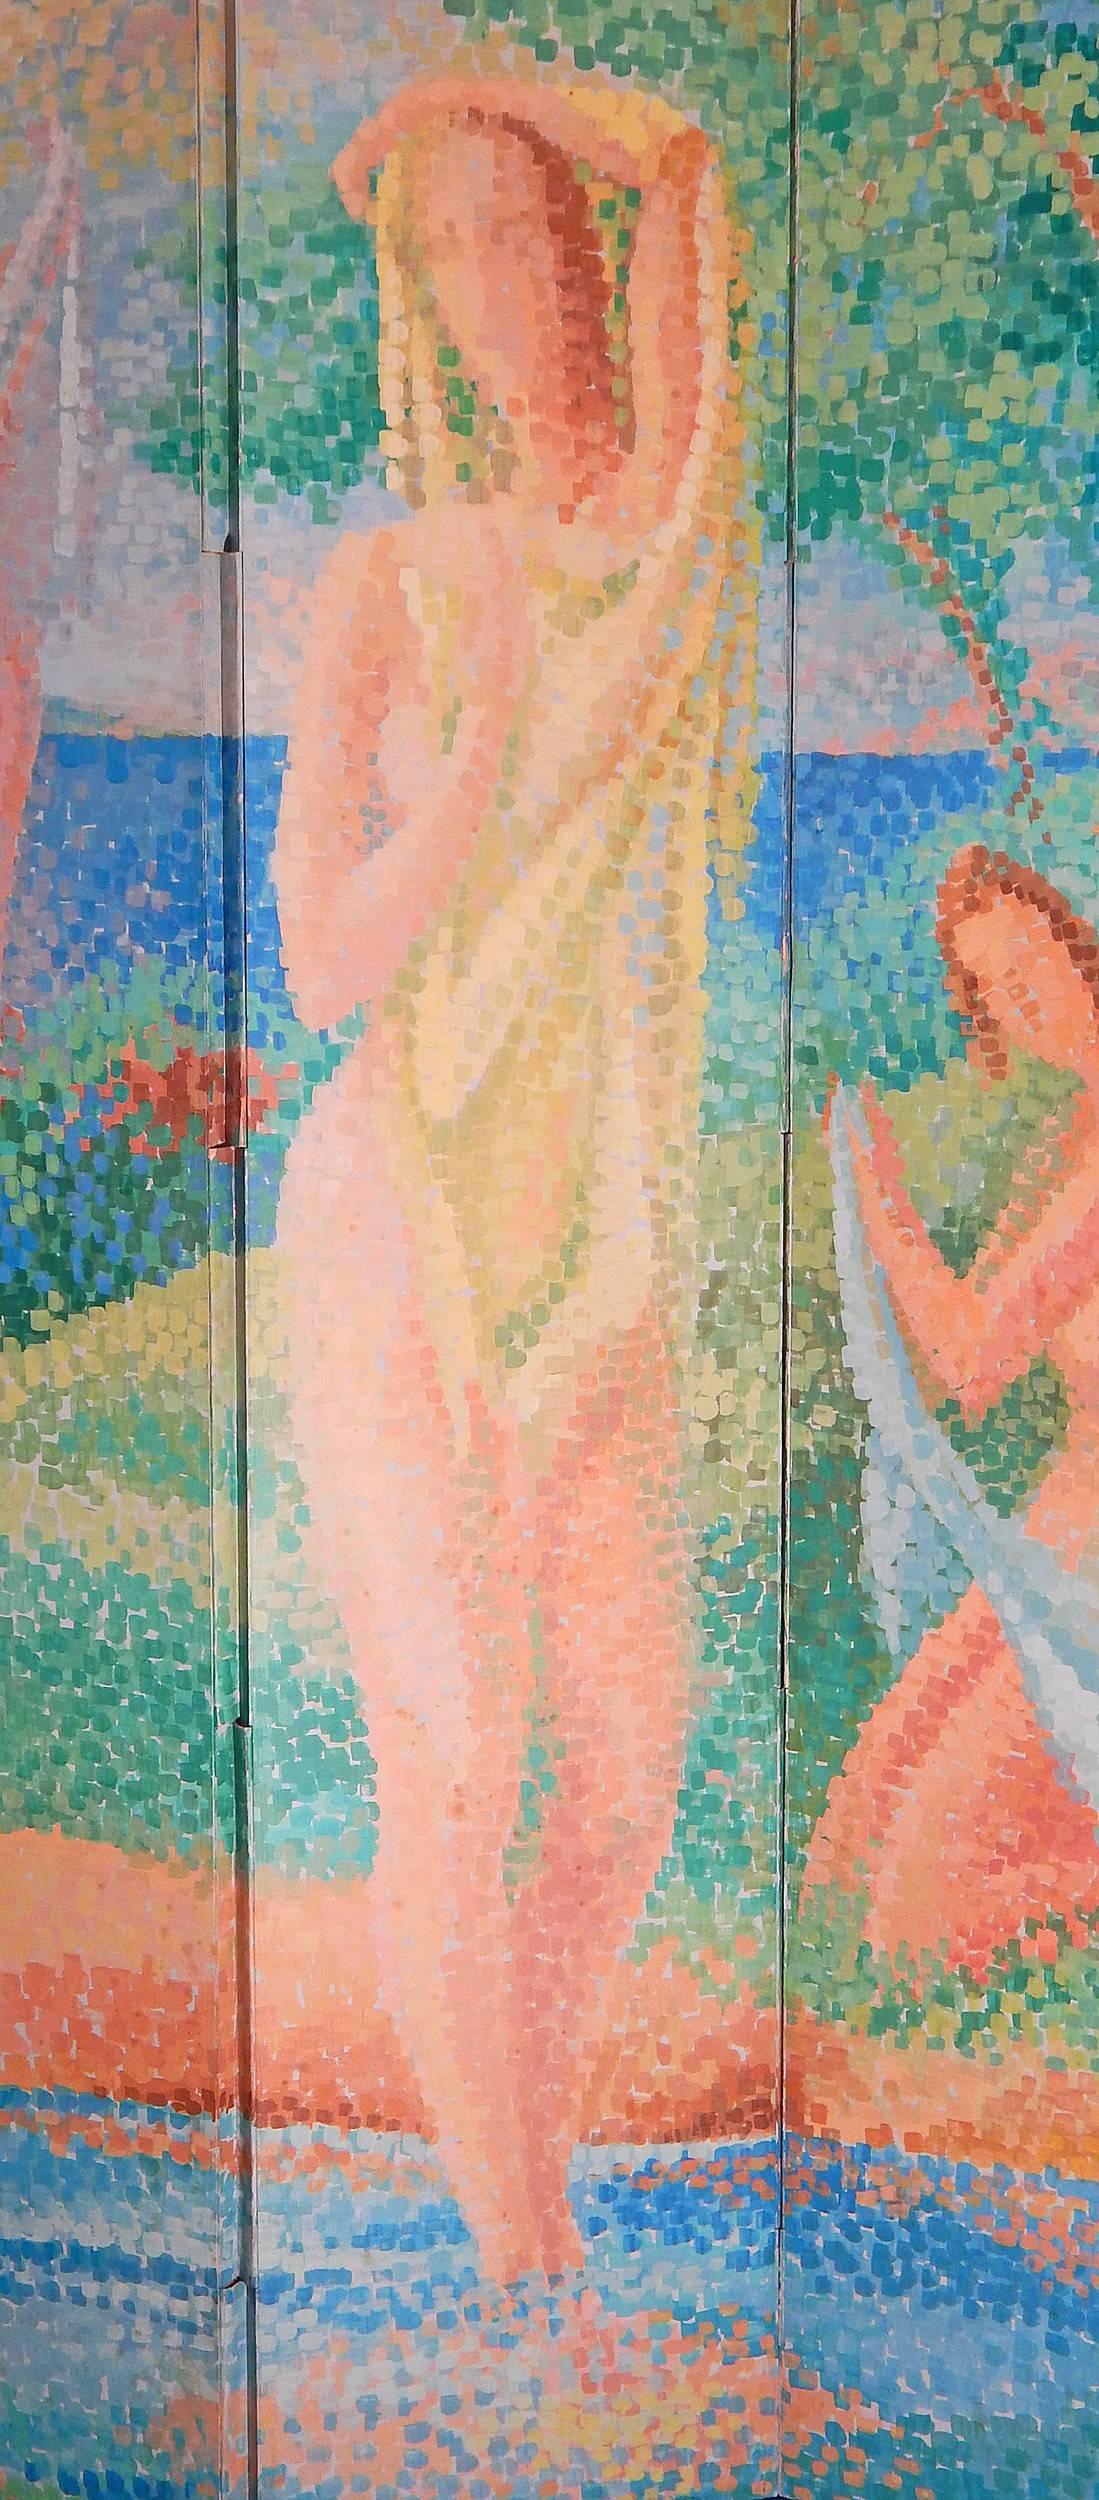 A vivid example of late Art Deco painting, executed in a pointillist manner, this four-panel screen was created by John Sennhauser, a Swiss-born artist who was active in New York from the 1930s to the 1960s. The screen was retailed by the renowned